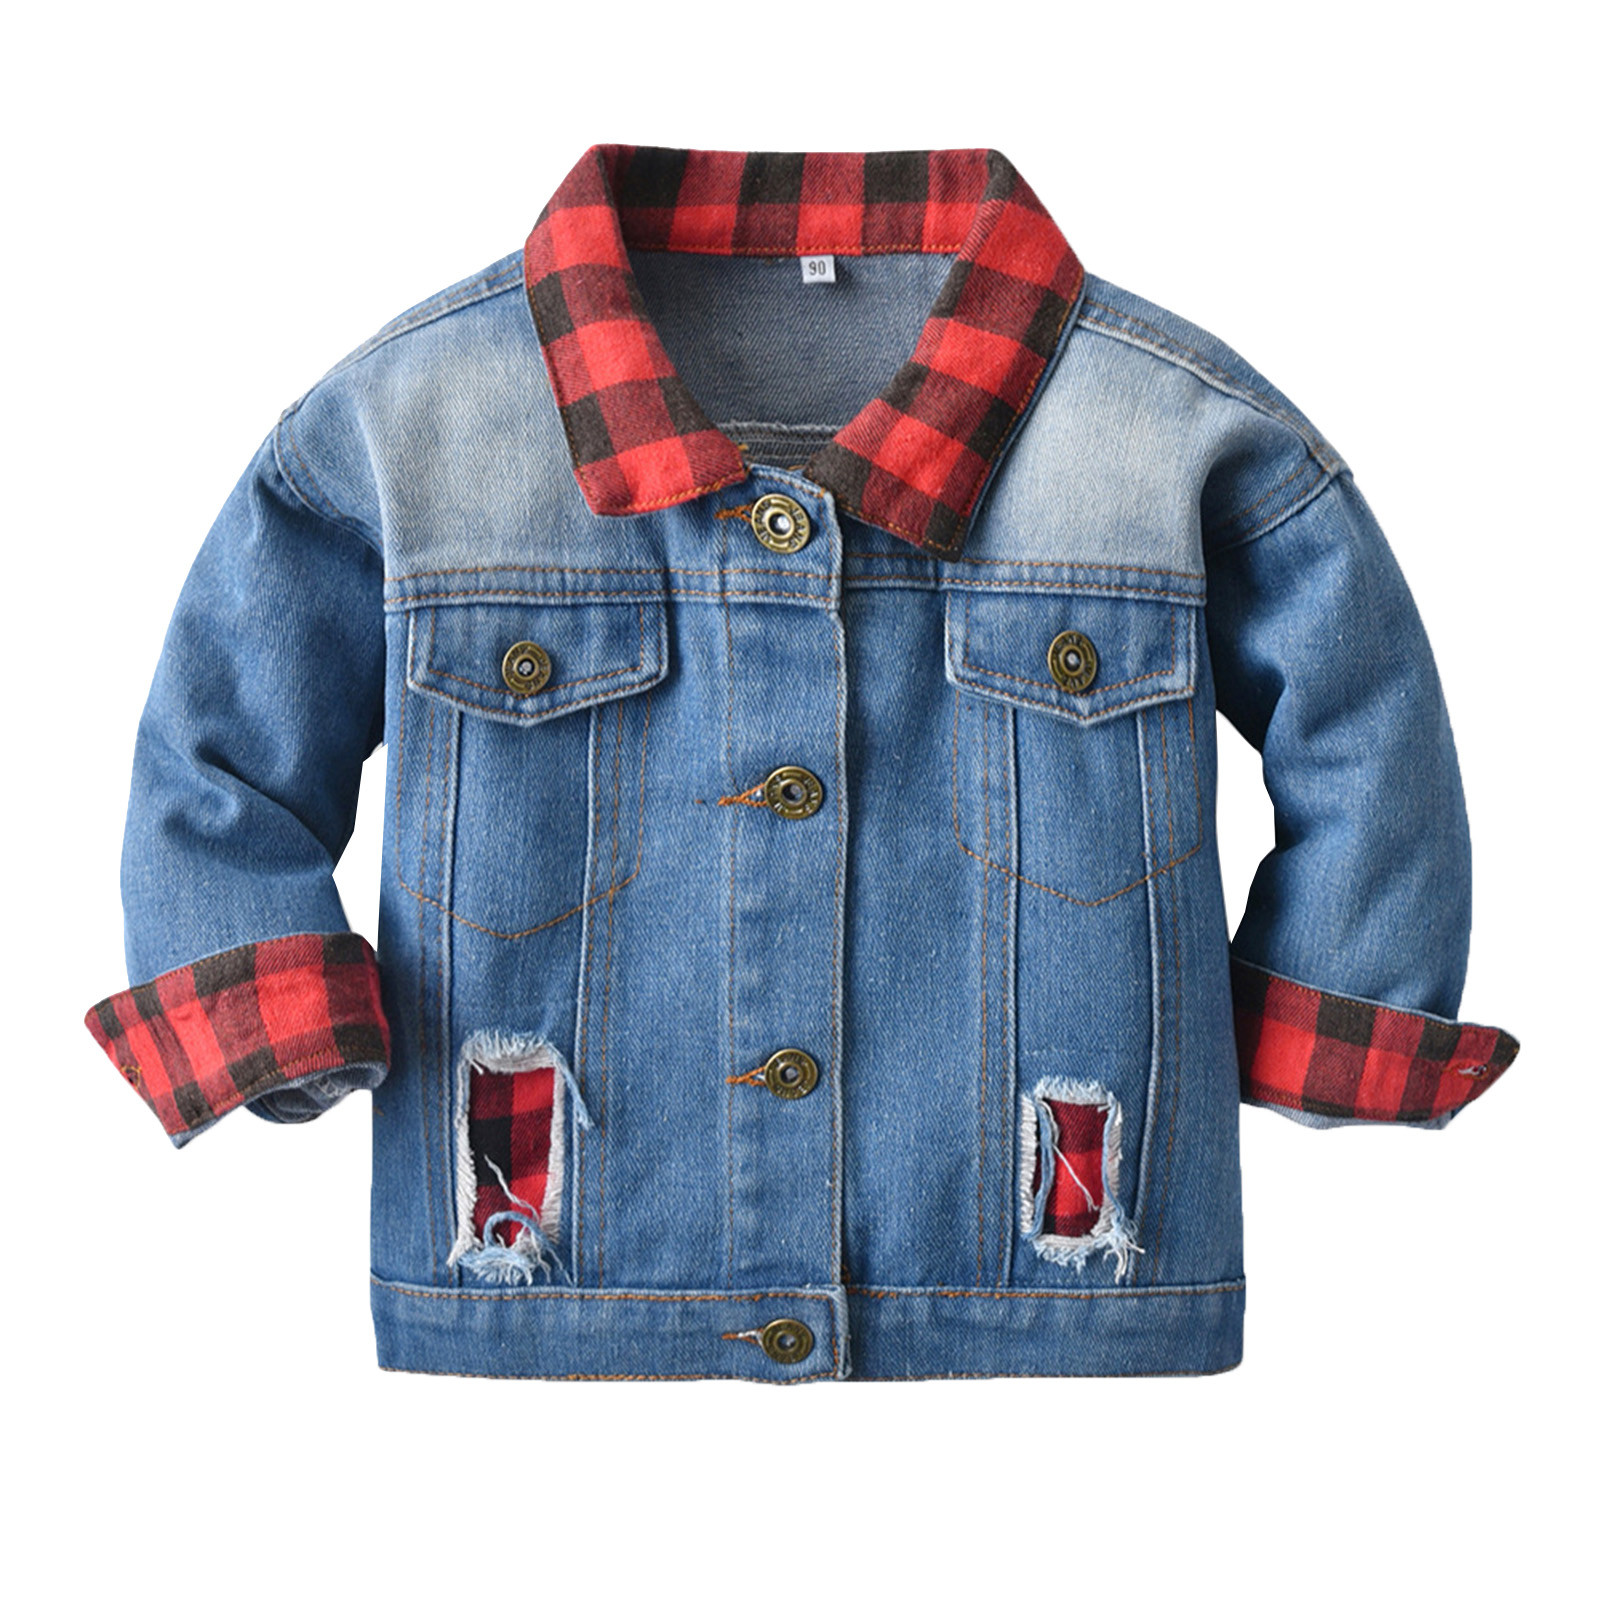 Tall Lightweight Jacket Toddler Children Outwear Red Plaid Over Winter Long Sleeve Denim Jacket Blouse Boys Coats for Baby Boy - image 1 of 6